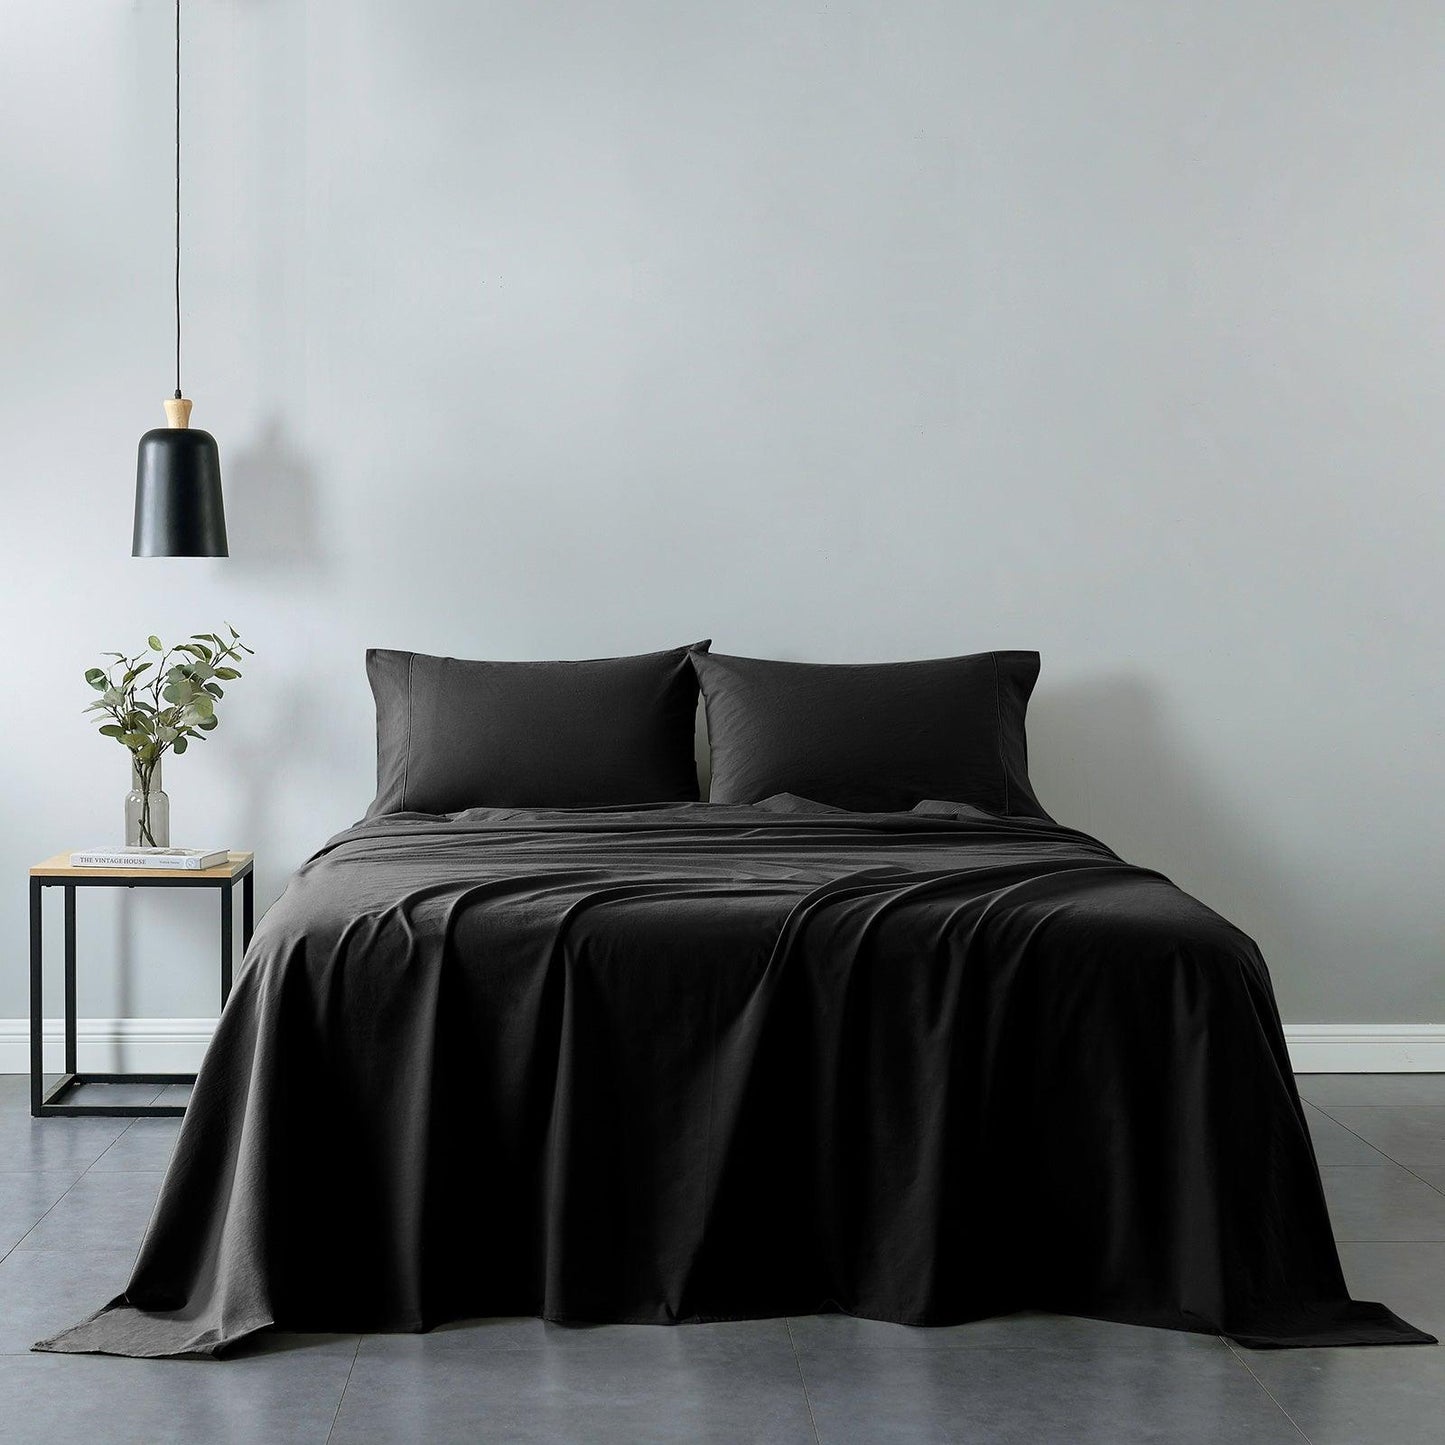 Royal Comfort Vintage Washed 100% Cotton Sheet Set Fitted Flat Sheet Pillowcases - Queen - Charcoal